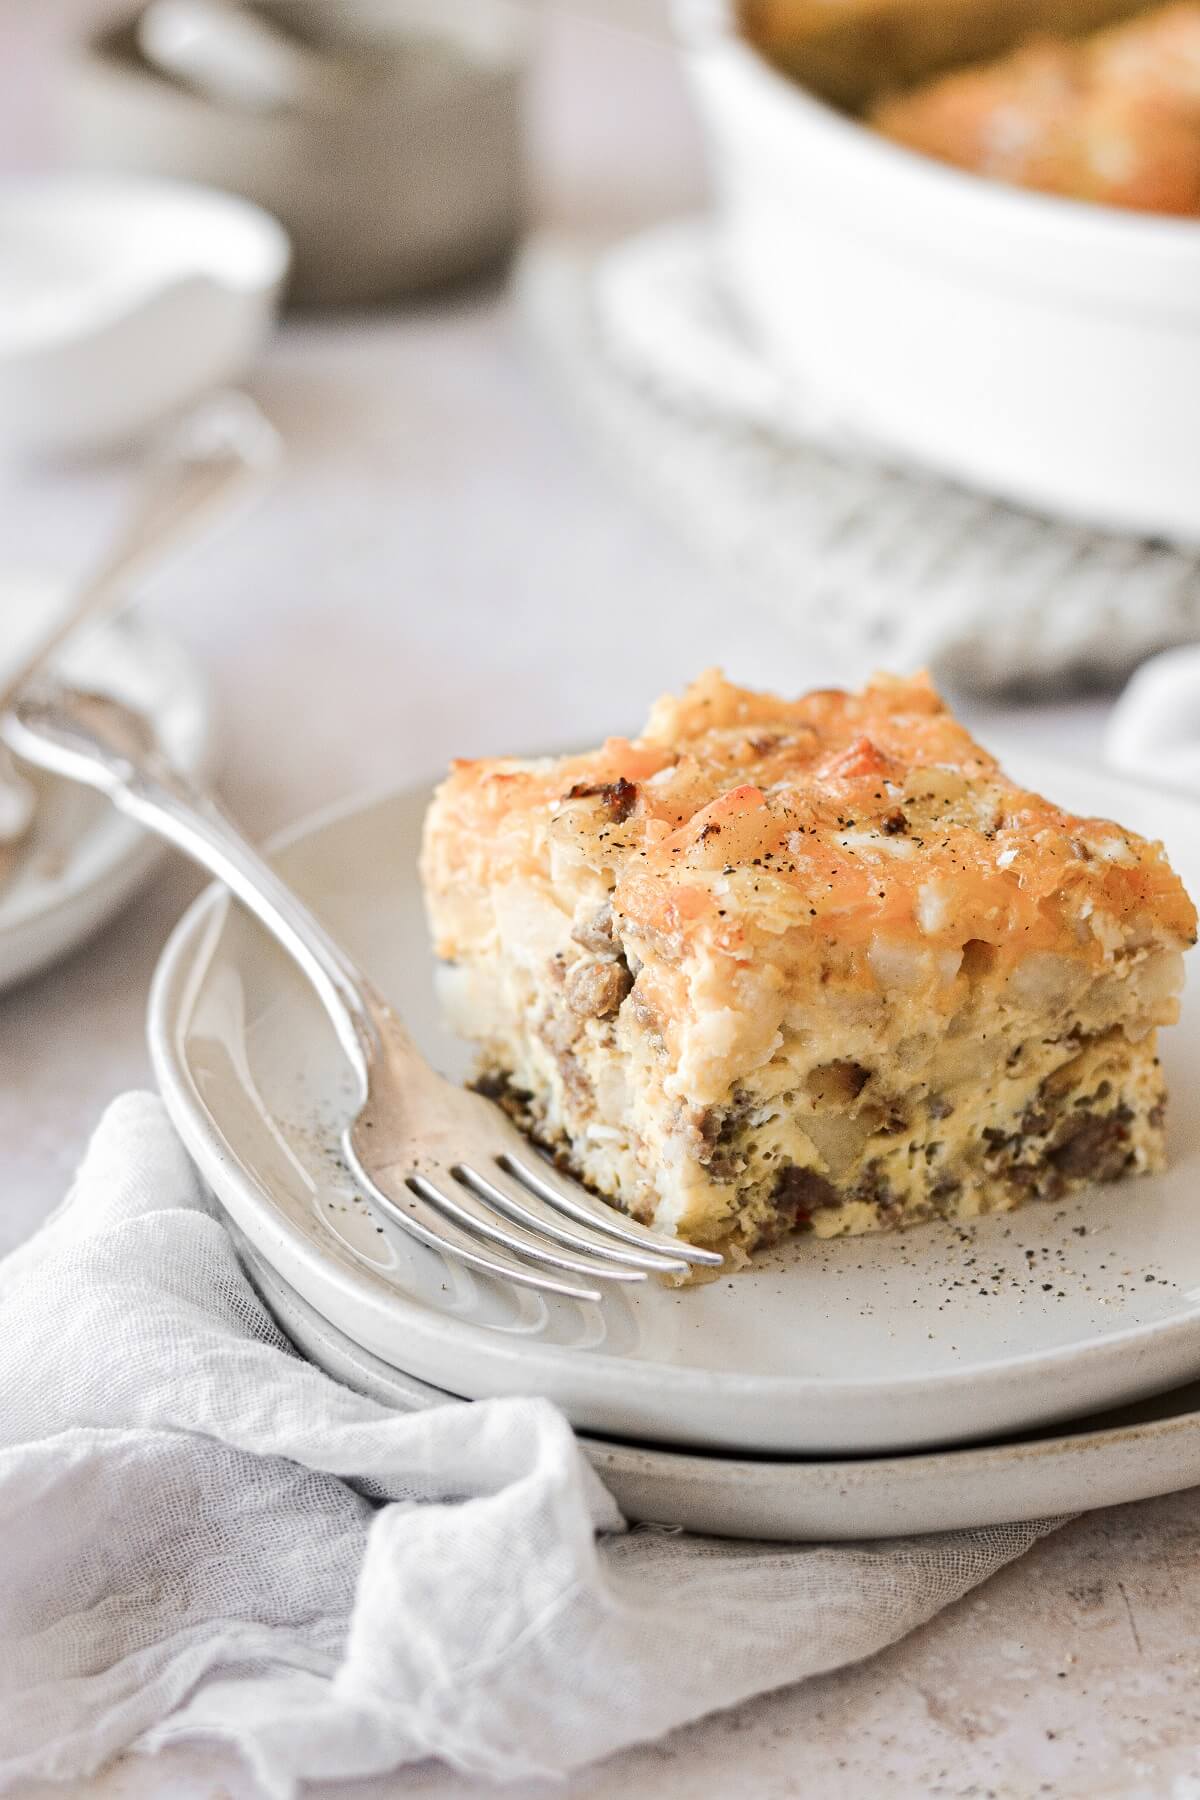 A piece of sausage hashbrown breakfast casserole on a plate.